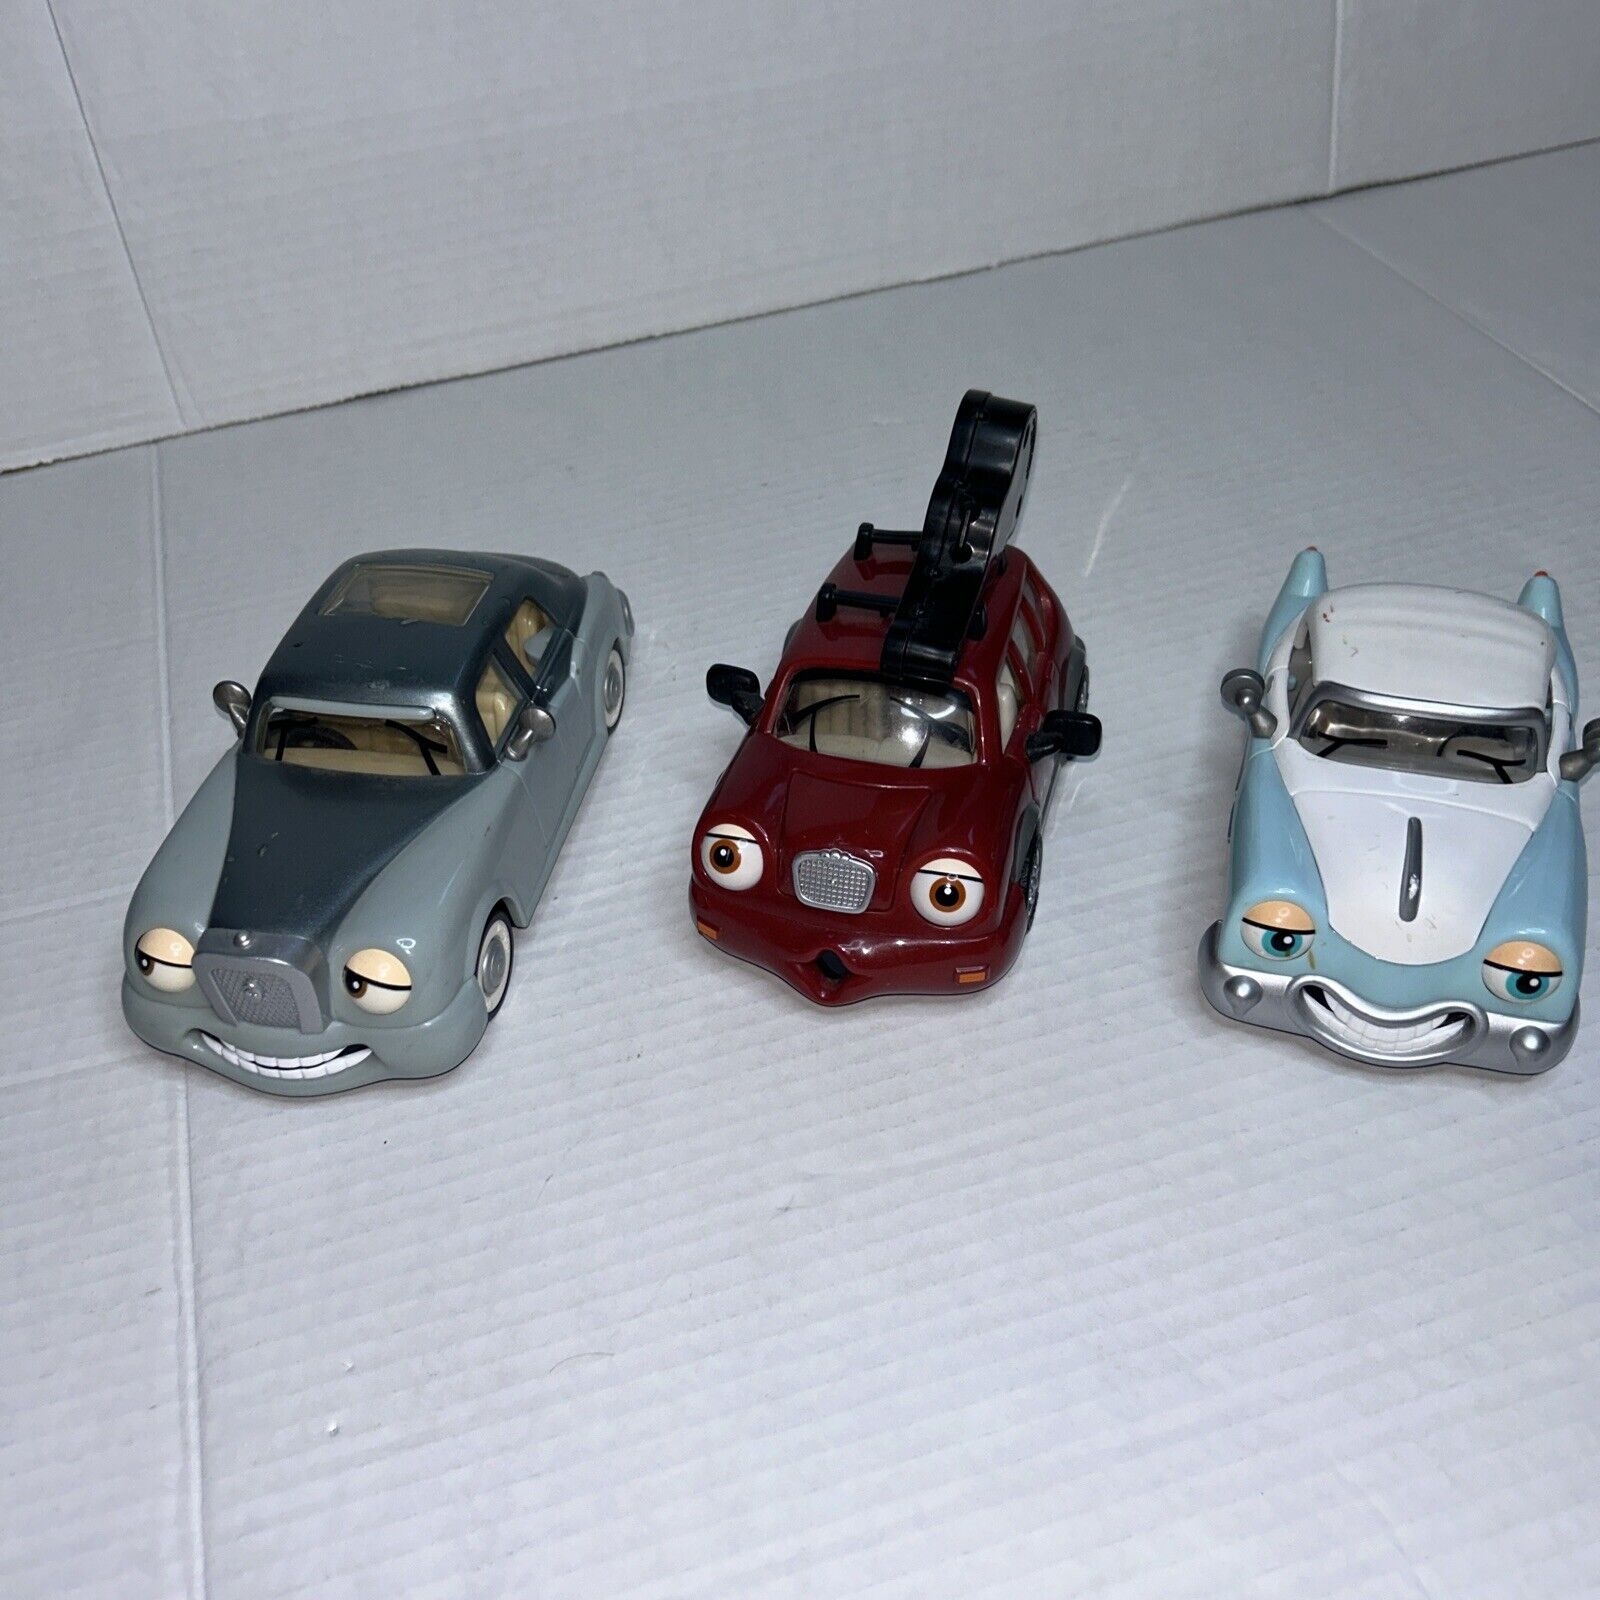 Vintage Chevron Cars Collectible Toy Vehicles No. 25,23,27 Lot Of 3